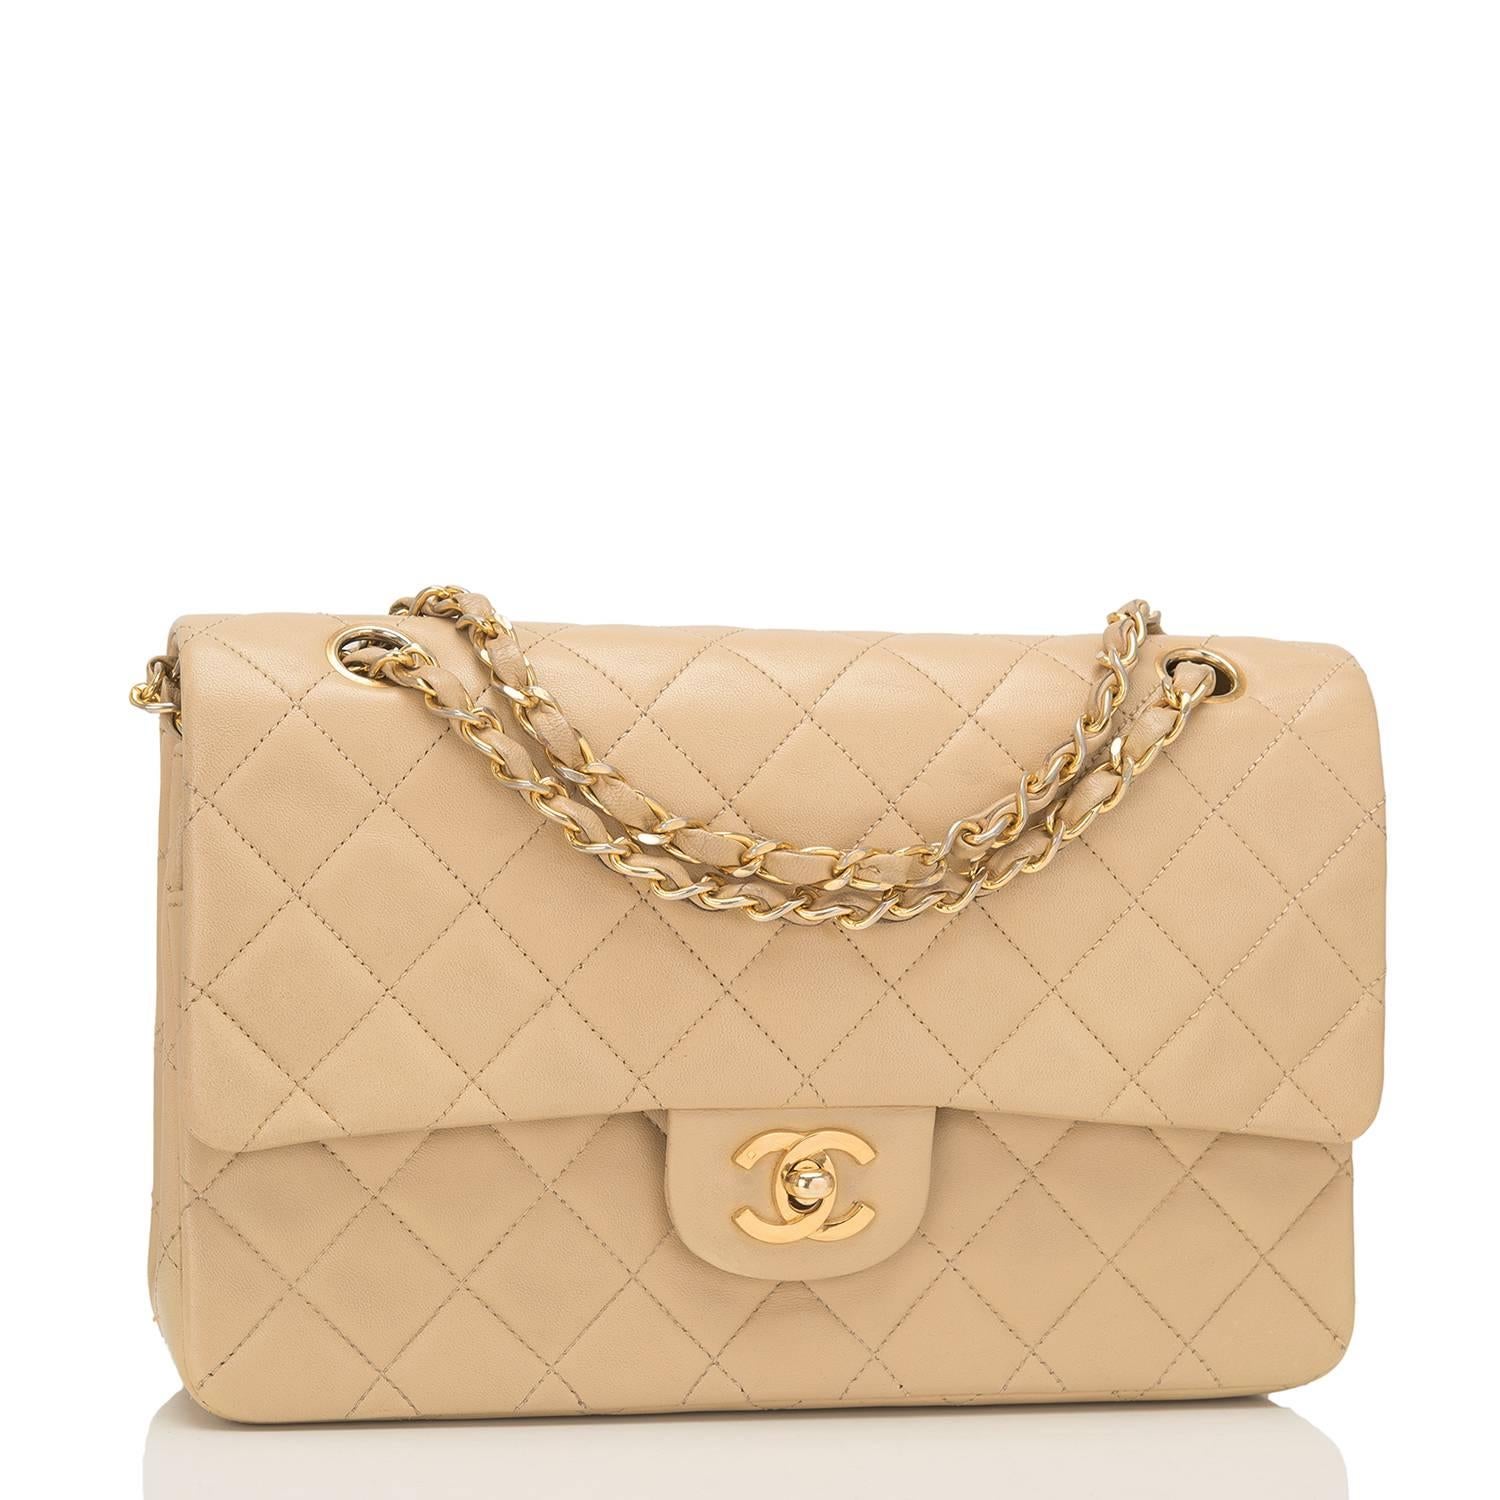 Chanel vintage medium Classic double flap bag of beige quilted lambskin accented with 24k gold plated hardware.

The bag features a front flap with signature CC turnlock closure, a half moon back pocket and an adjustable interwoven gold tone